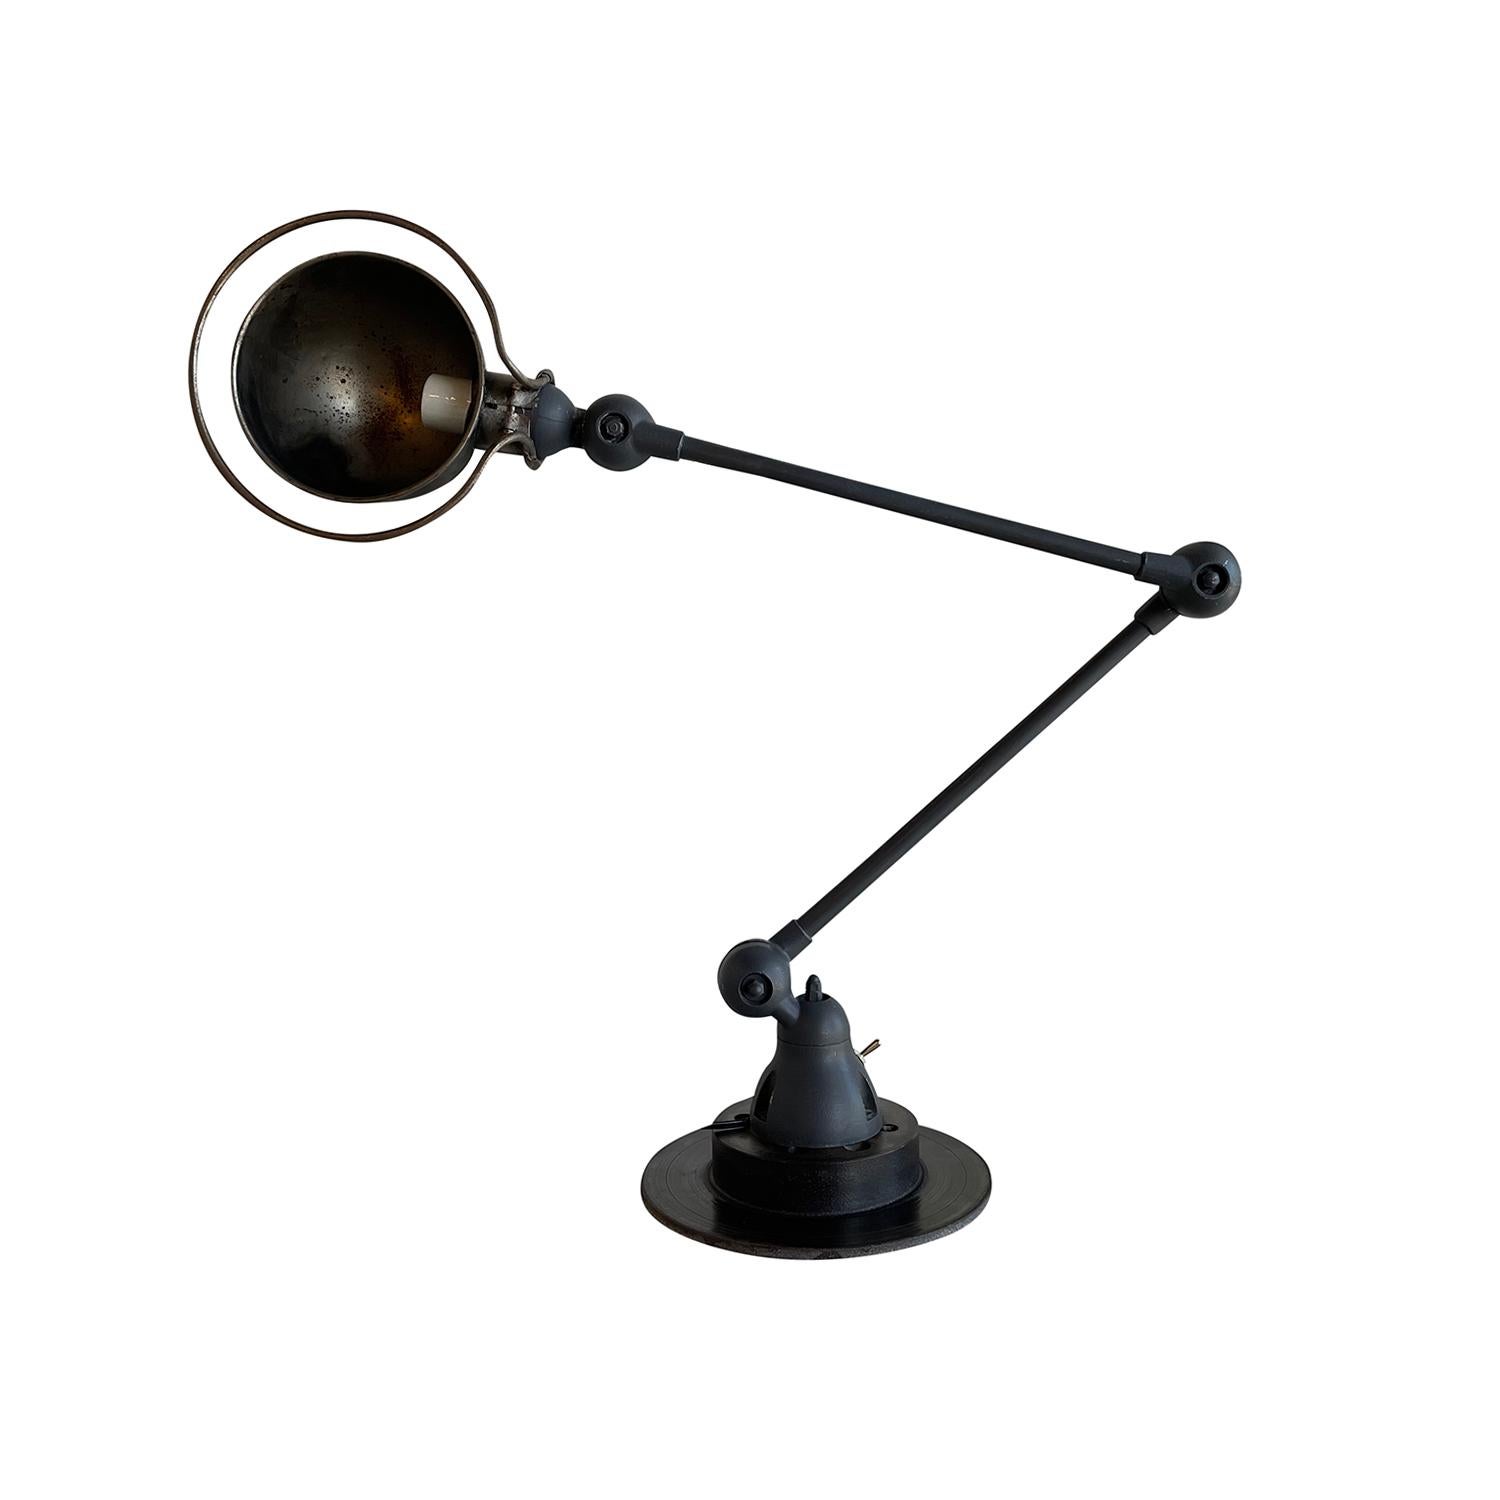 A grey-black, vintage Mid-Century Modern French desk light made of hand crafted metal, designed by Jean Louis Domecq and produced by Jielde, in good condition. The industrial car brake, table lamp is composed with two adjustable arms, featuring a